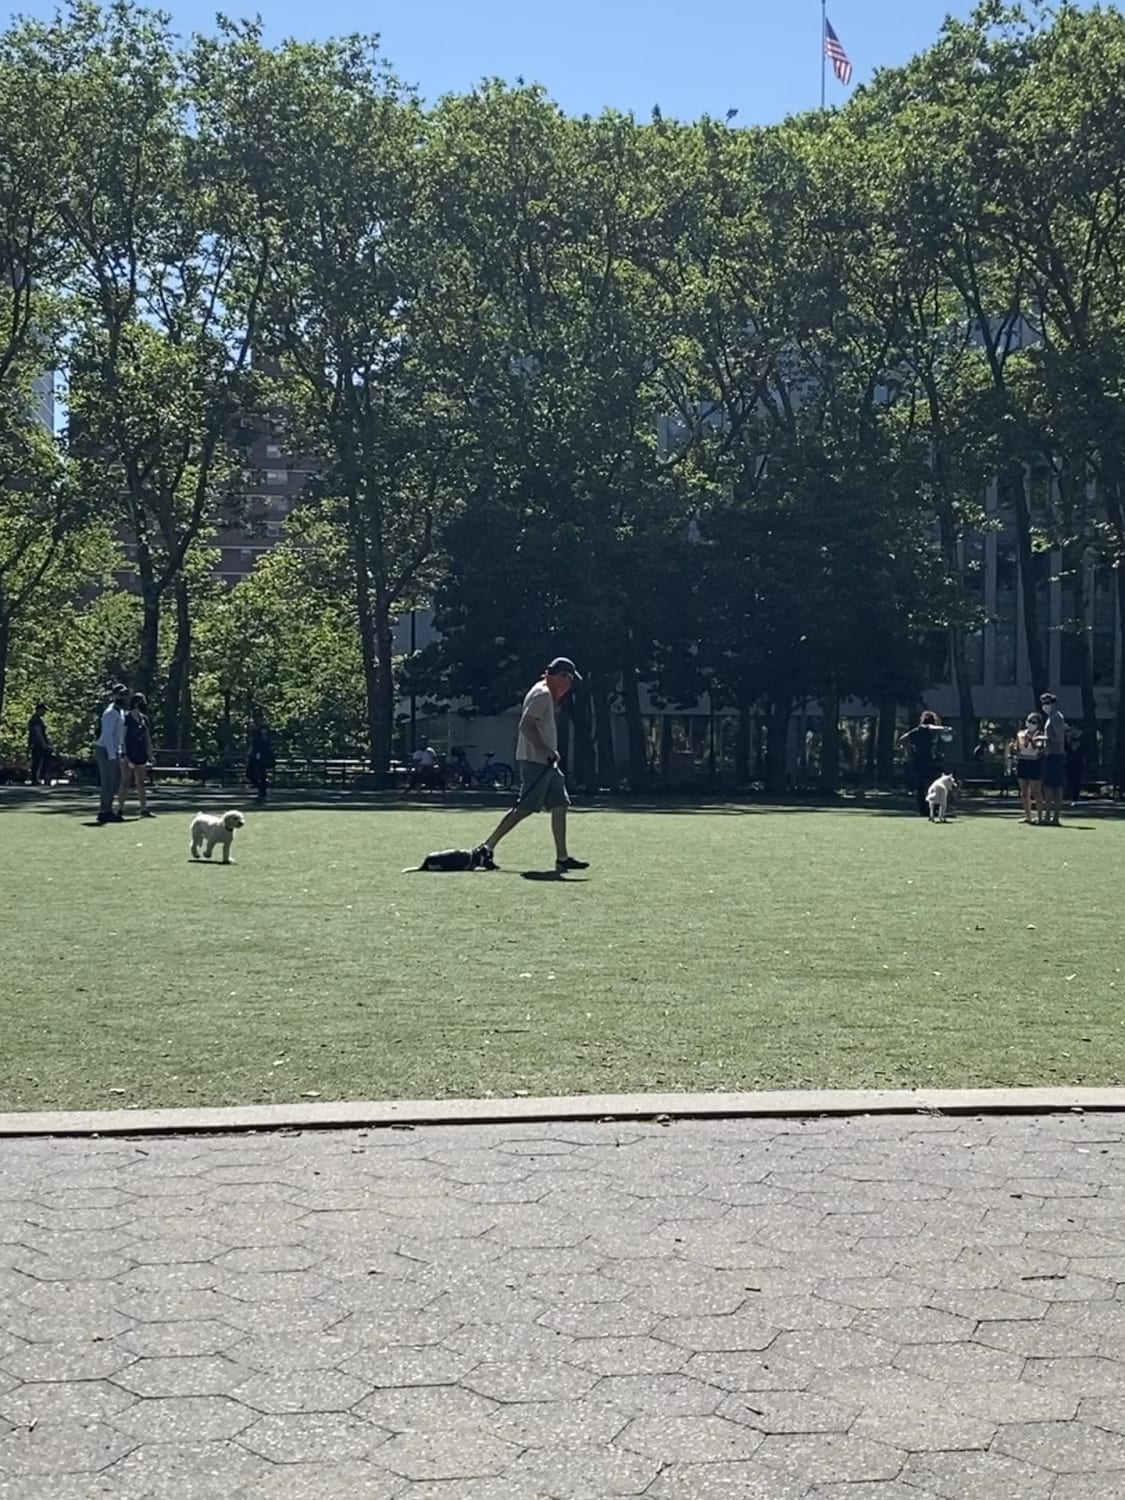 I guess he really doesn’t want to leave the park.